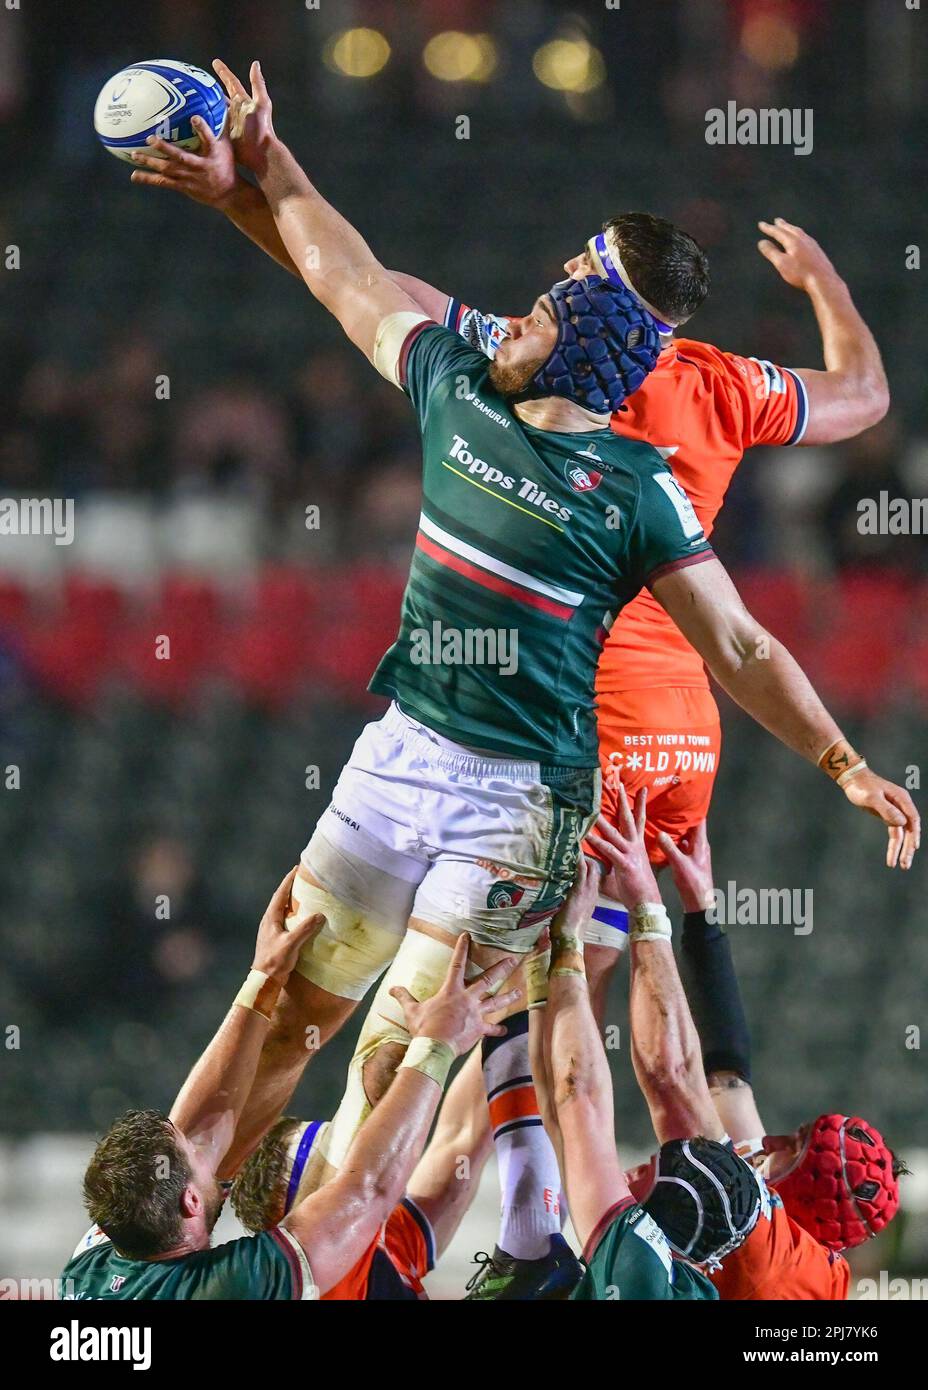 Leicester Tigers Rugby v Edinburgh Rugby Team at the Mattioli Stadium in Leicester, UK on 31 March 2023.  Battle for the ball at the line out at the Mattioli Rugby Stadium, Leicester, Uk  Credit: Mark Dunn/Alamy Live News Stock Photo